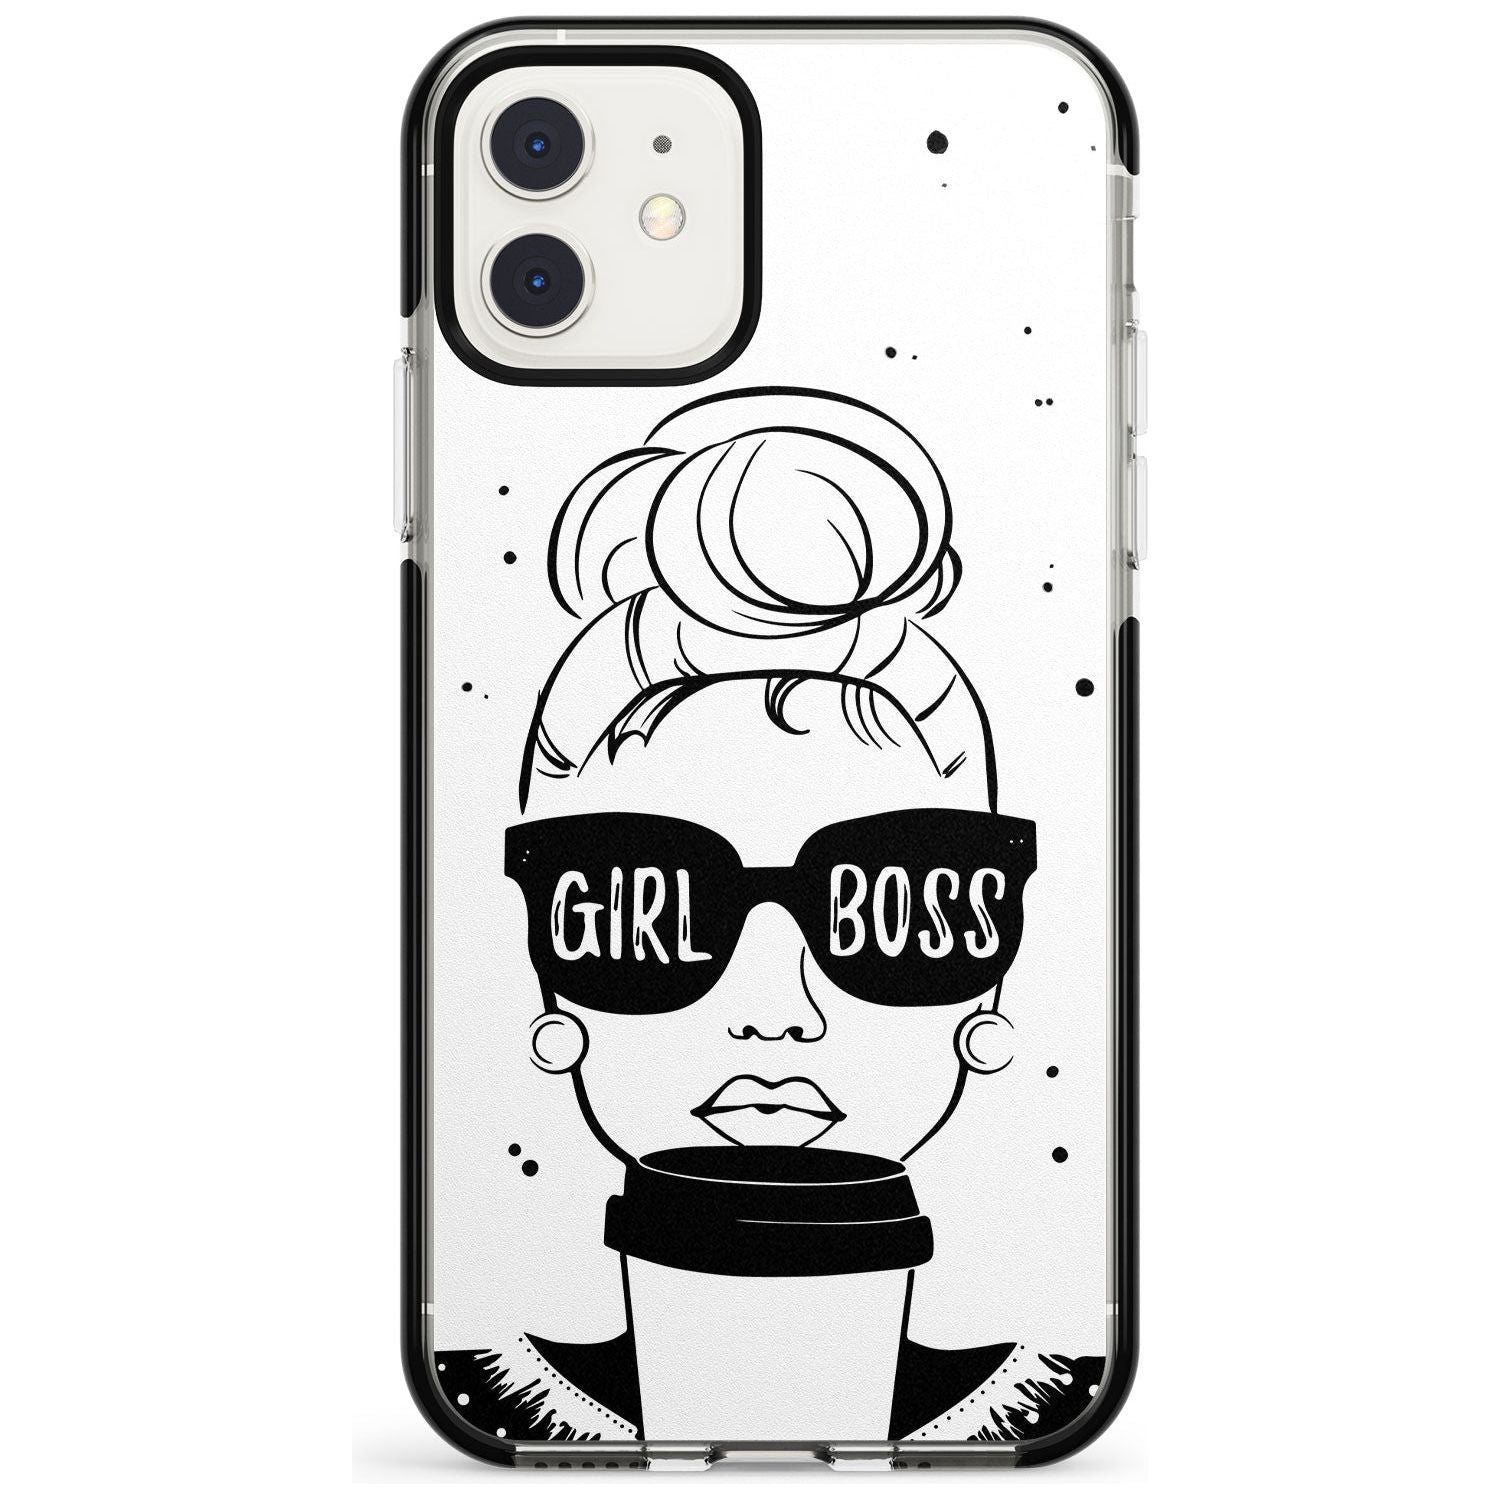 Girl Boss Black Impact Phone Case for iPhone 11 Pro Max